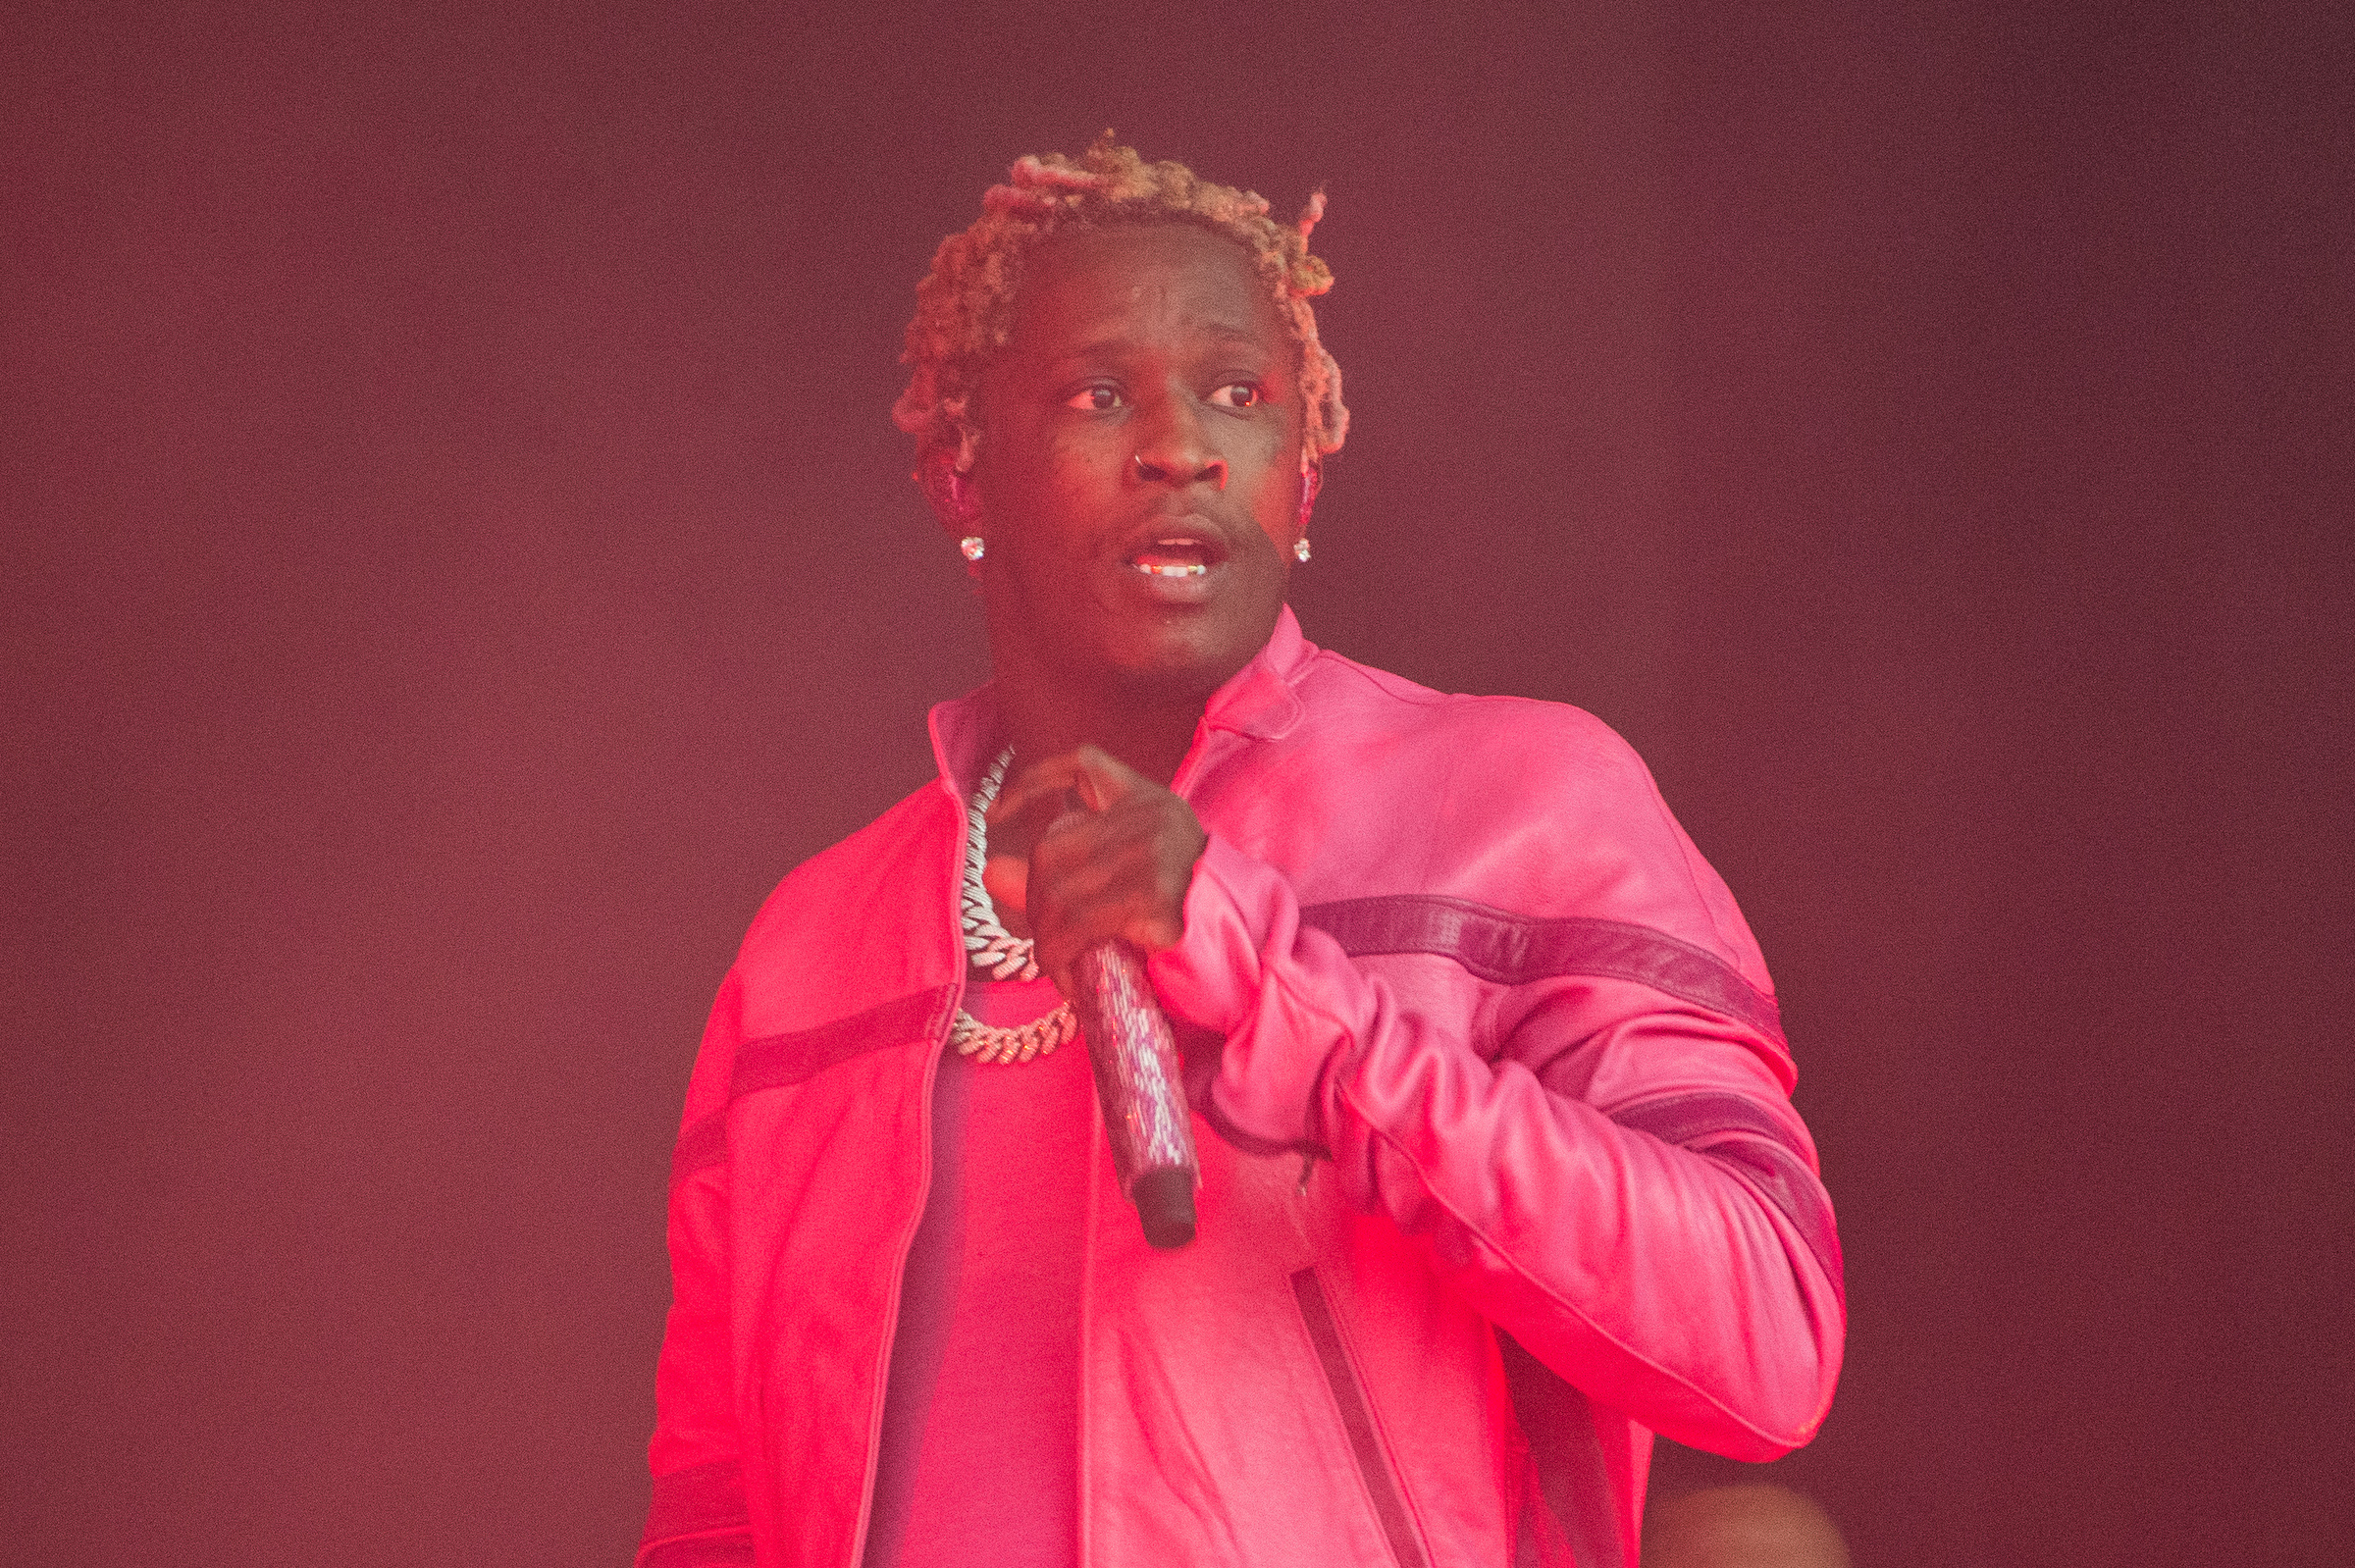 Young Thug performs on stage